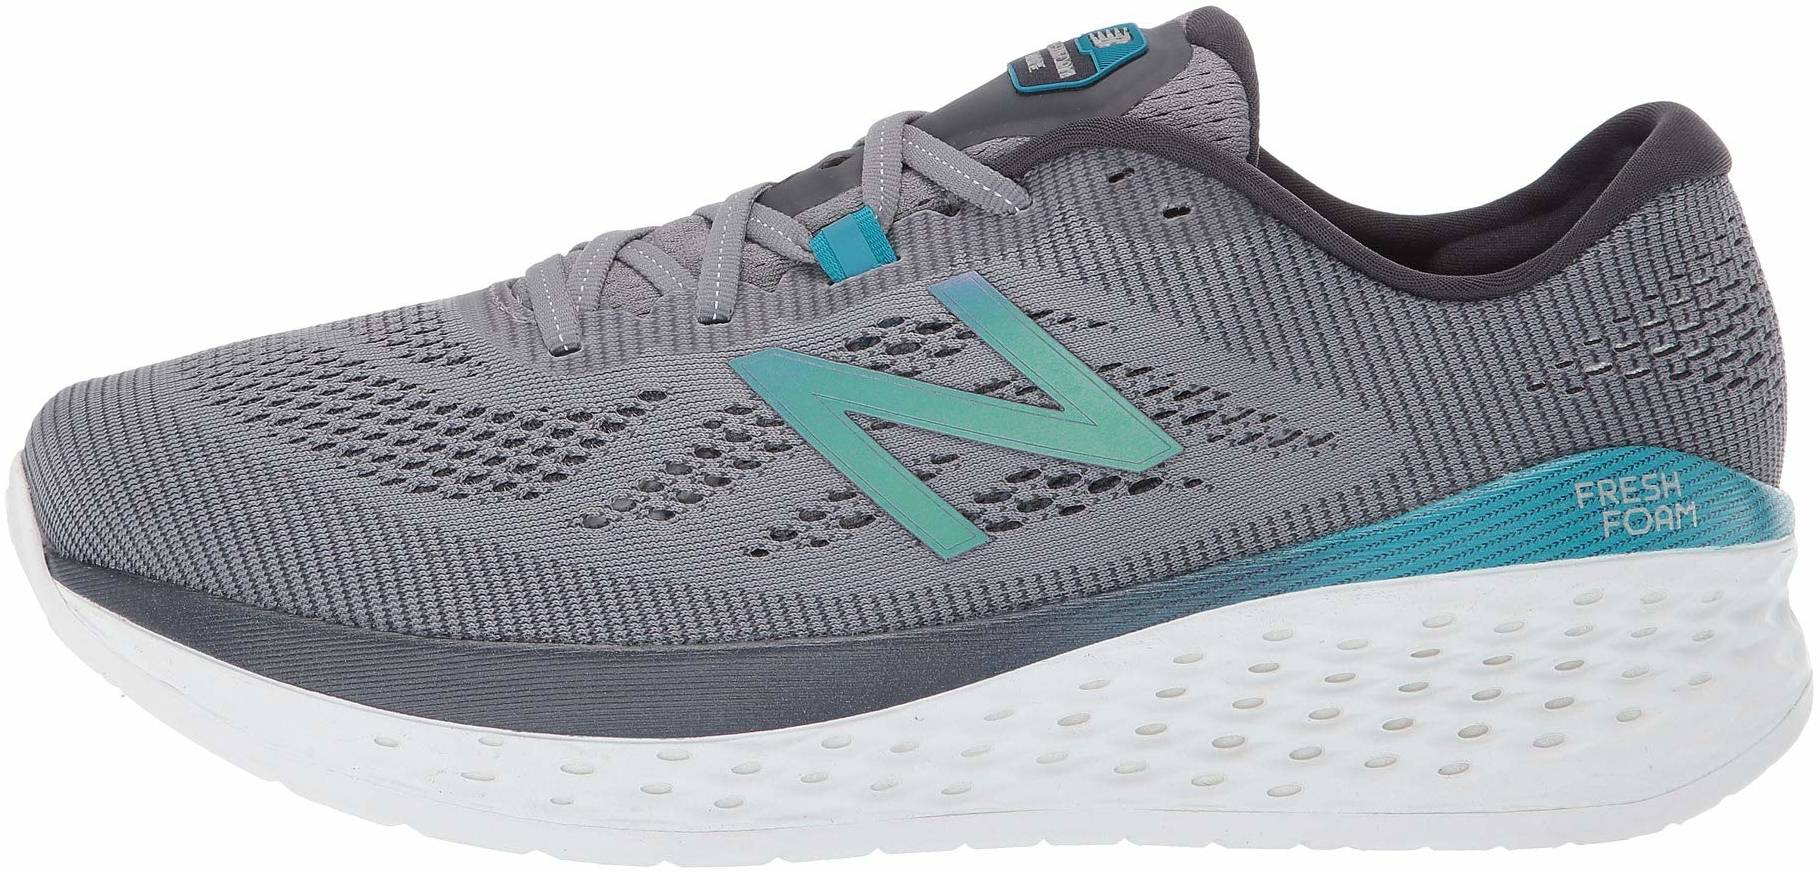 Save 54% on New Balance Running Shoes 